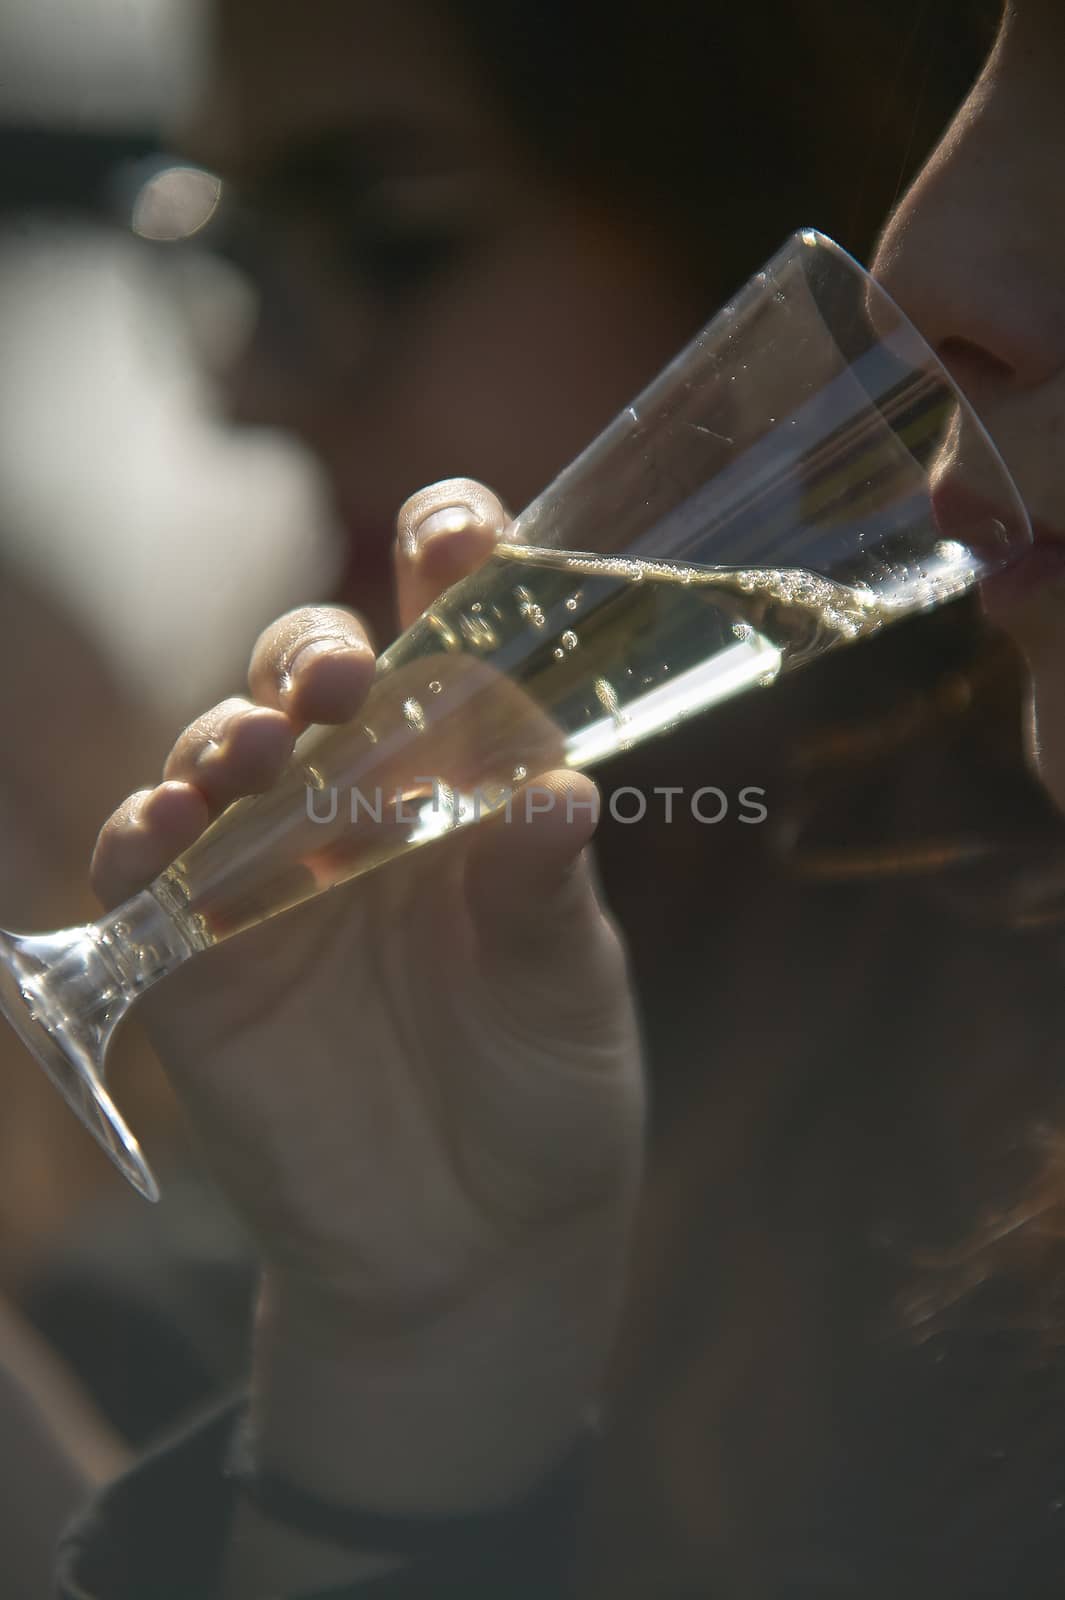 Drink the sparkling wine by pippocarlot